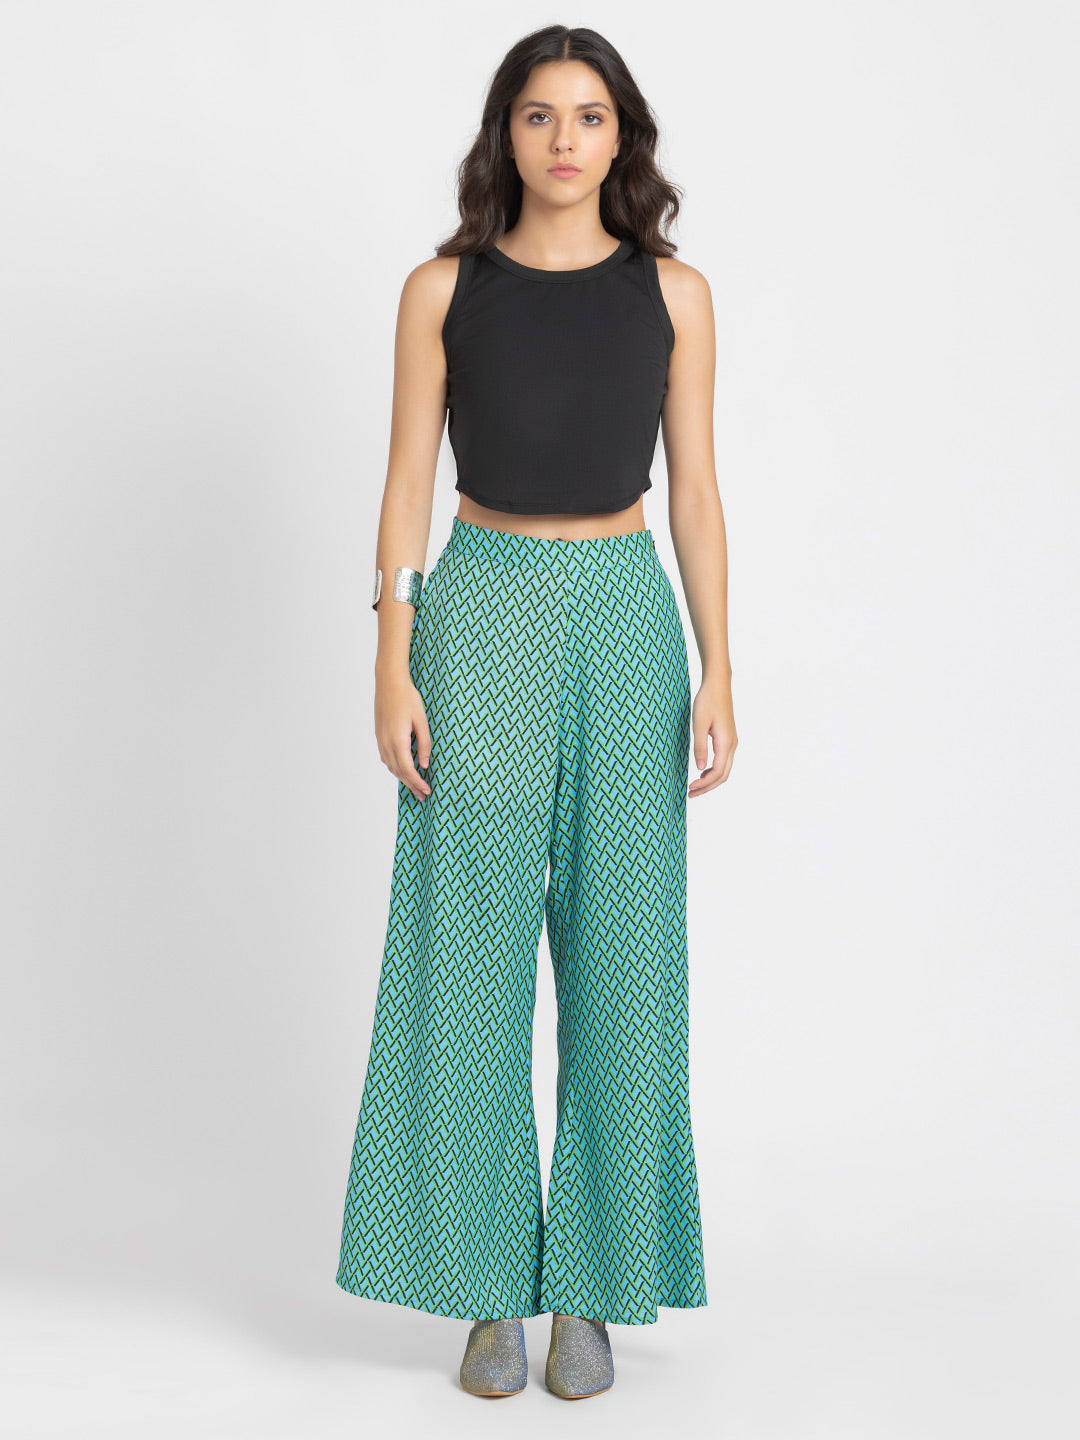 Geometrical Pant from Shaye , Pants for women